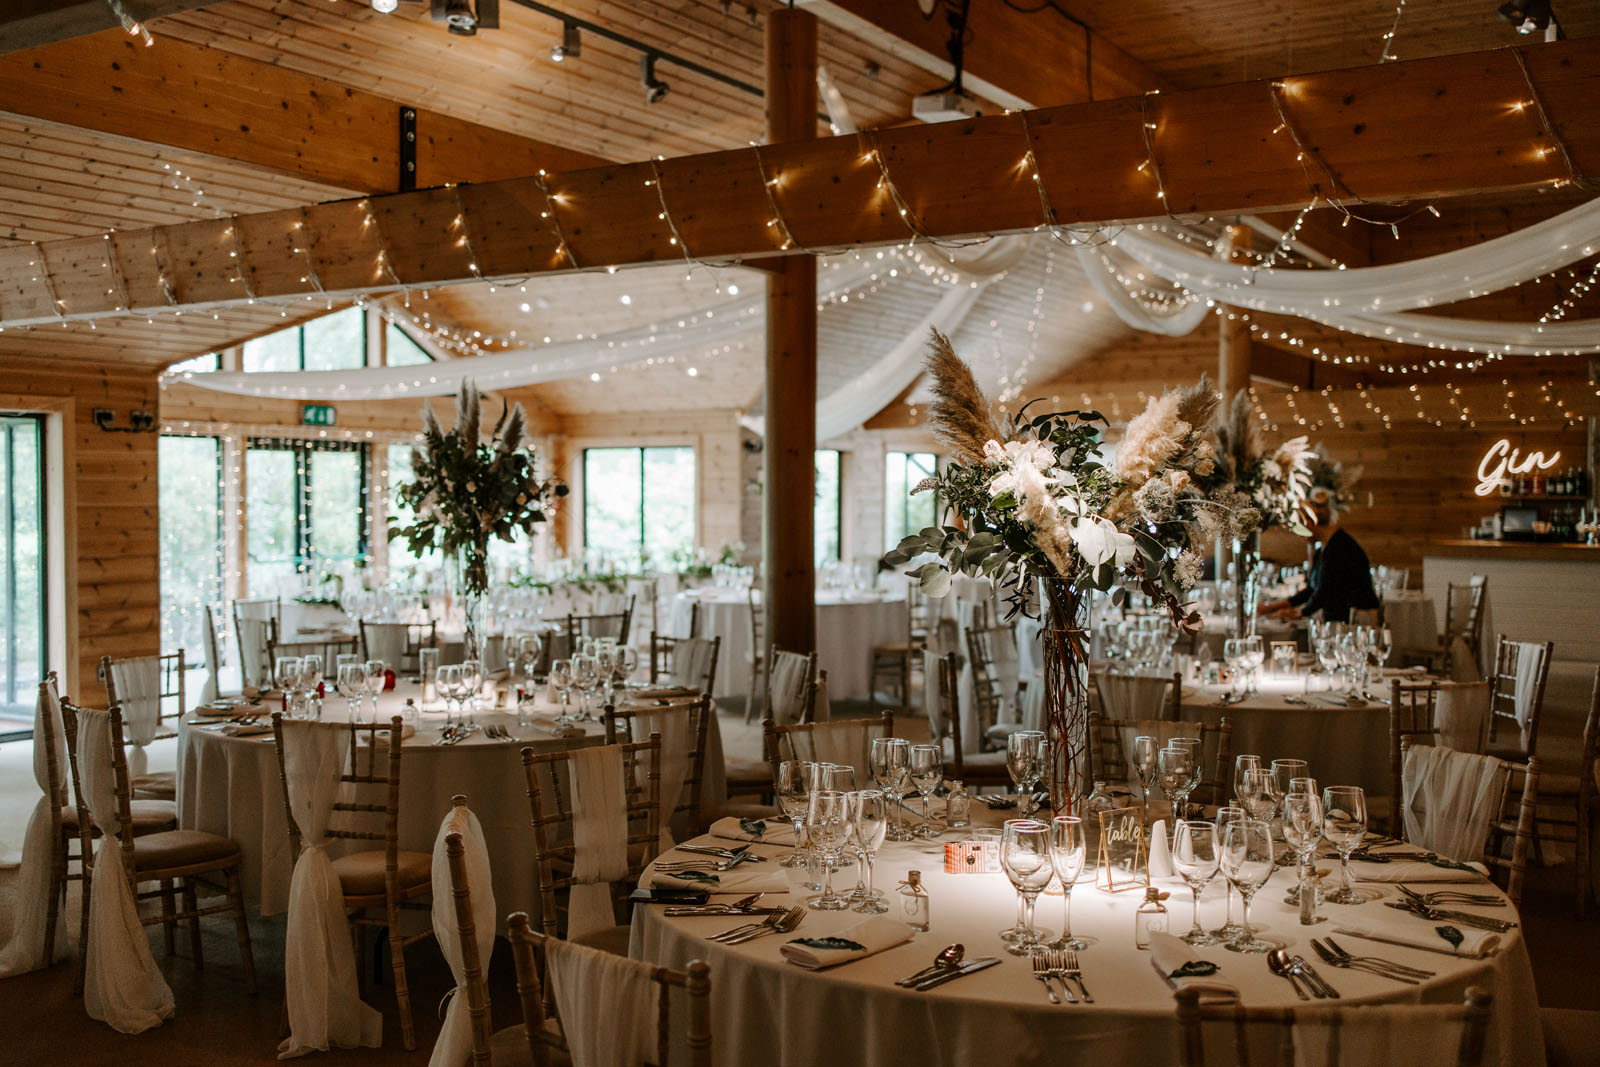 Styal Lodge, Cheshire wedding venue, by Opperhill